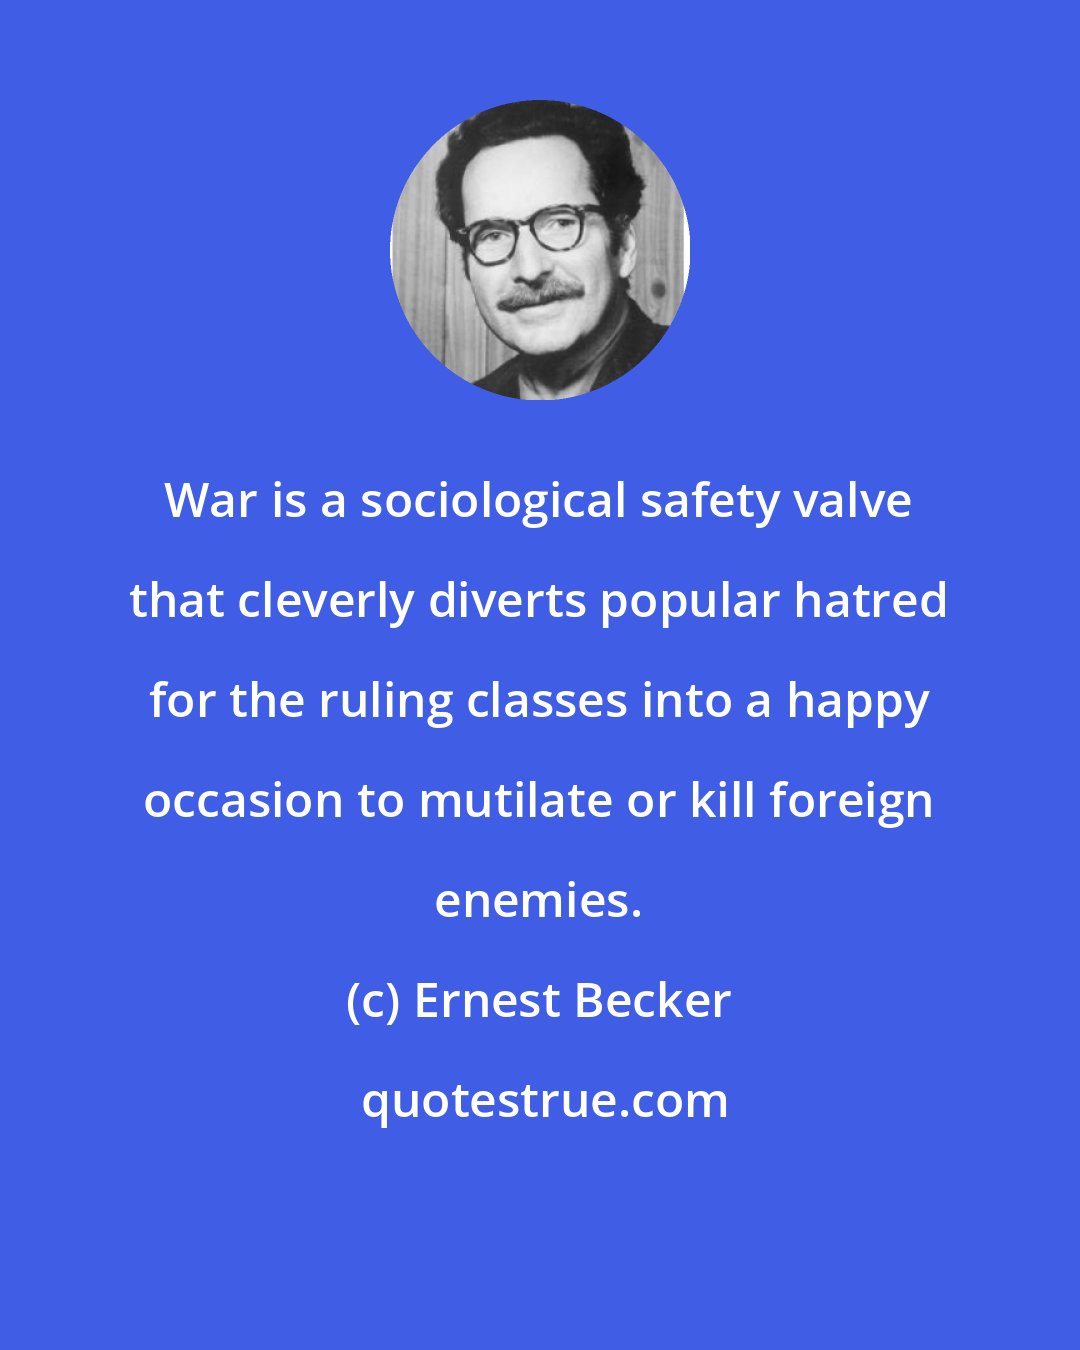 Ernest Becker: War is a sociological safety valve that cleverly diverts popular hatred for the ruling classes into a happy occasion to mutilate or kill foreign enemies.